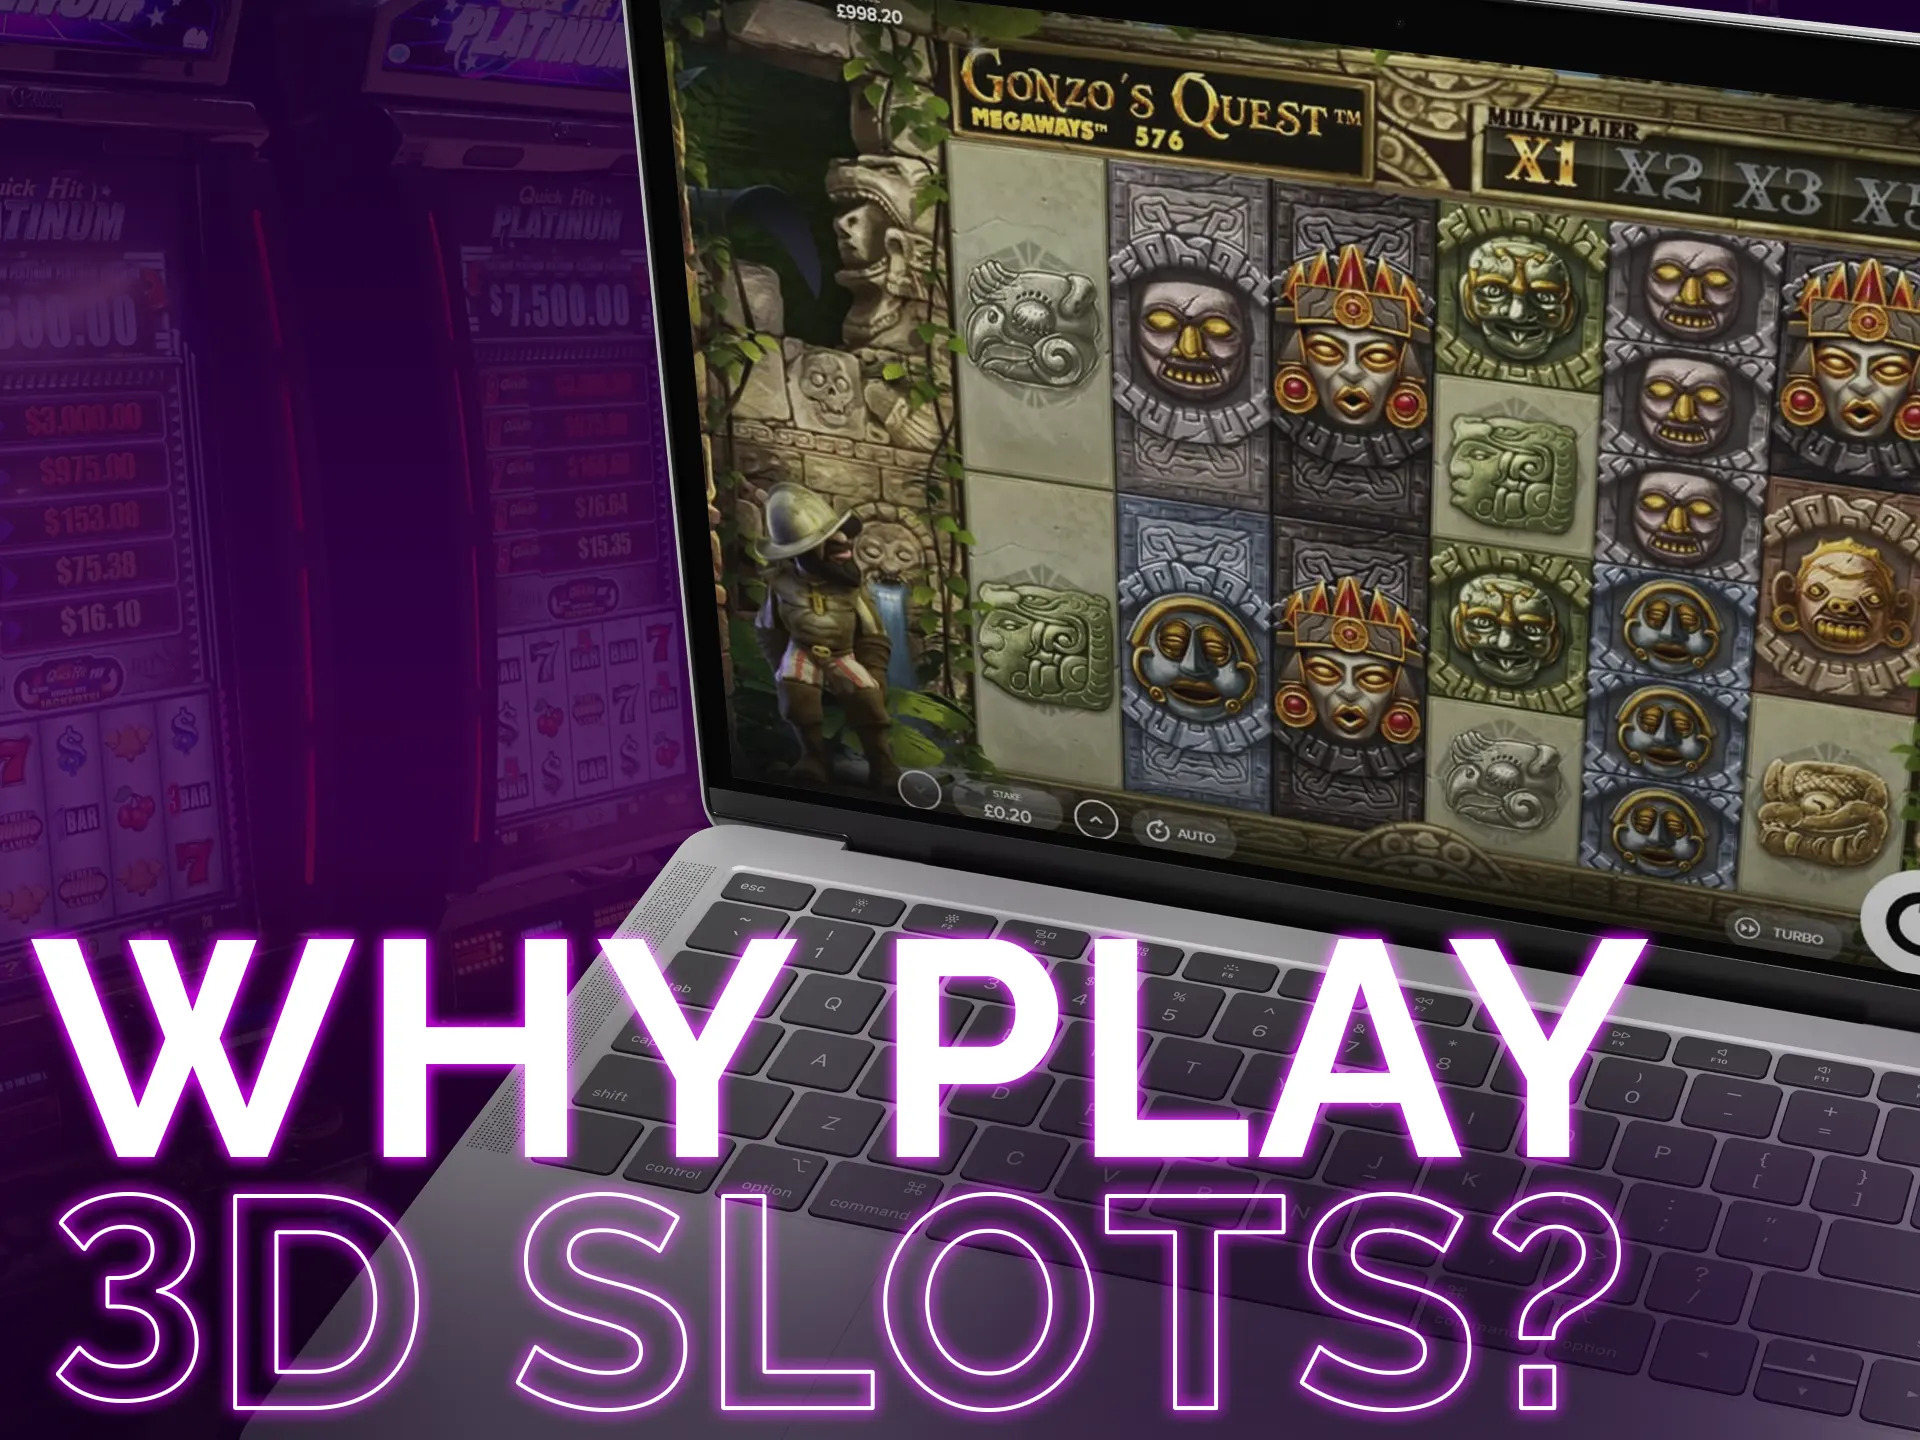 Check out the list of benefits of 3D slots.